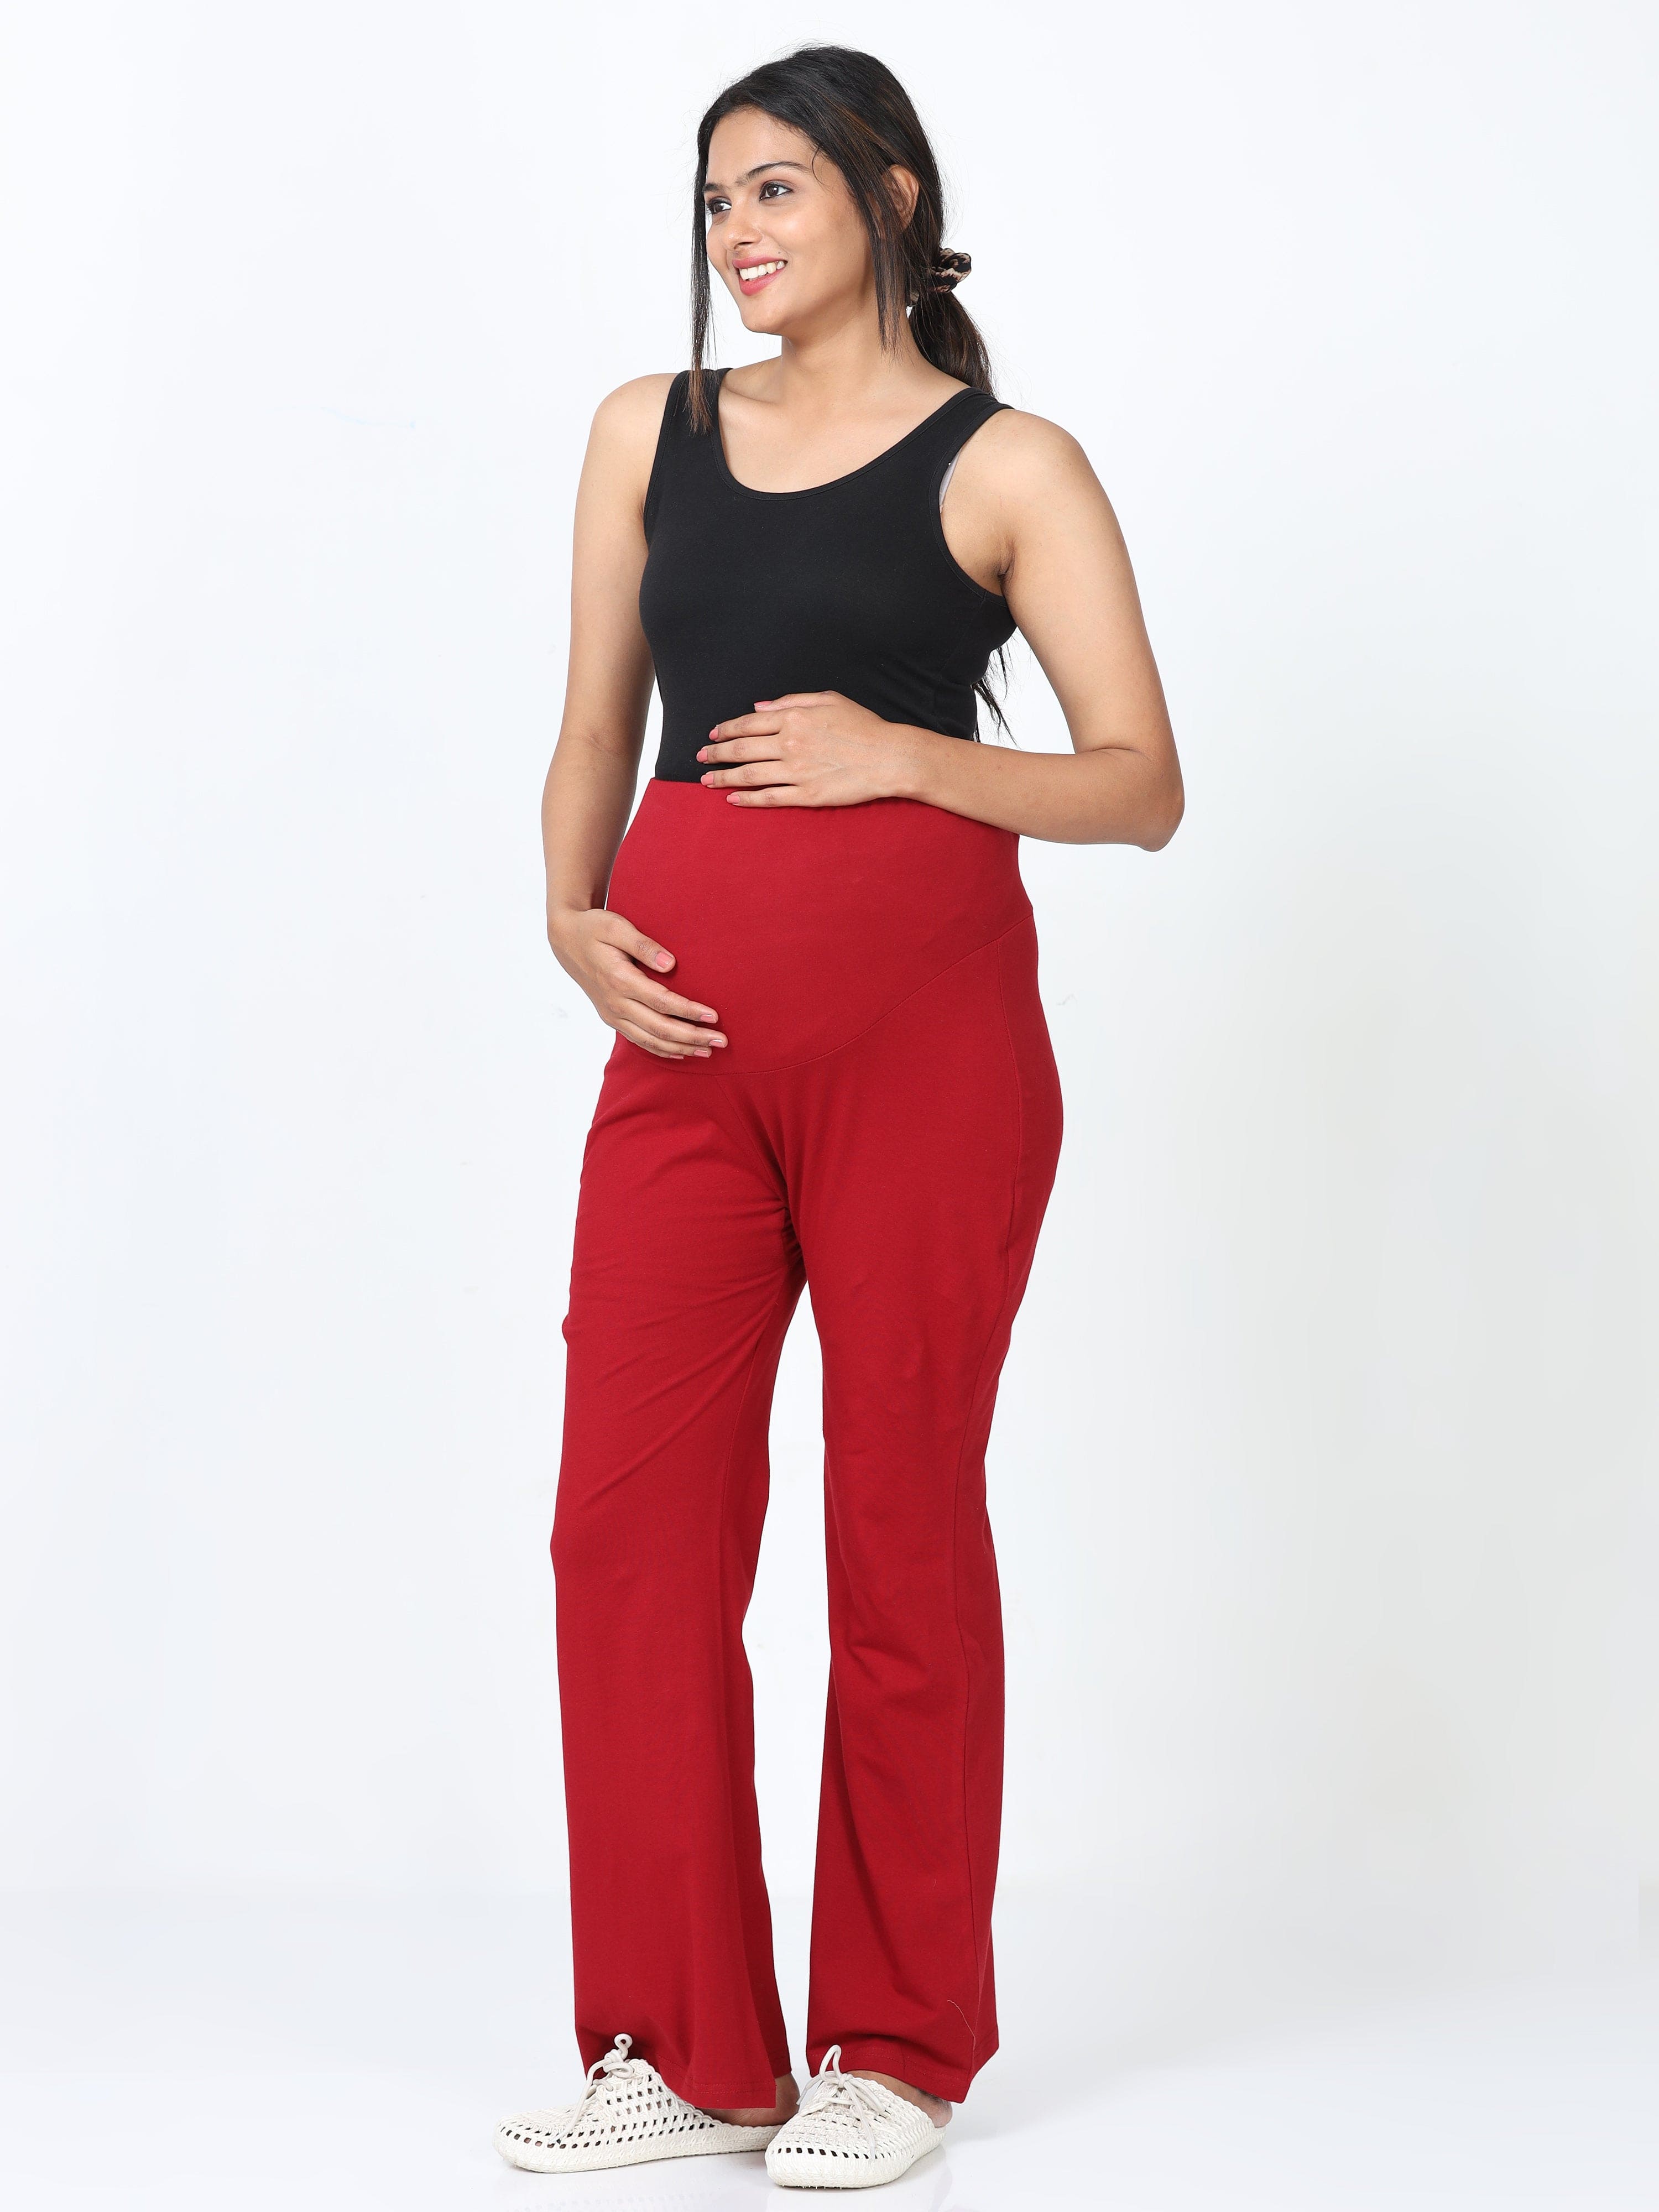 Buy Chic, Cotton Maternity Wear By Putchi Online | LBB